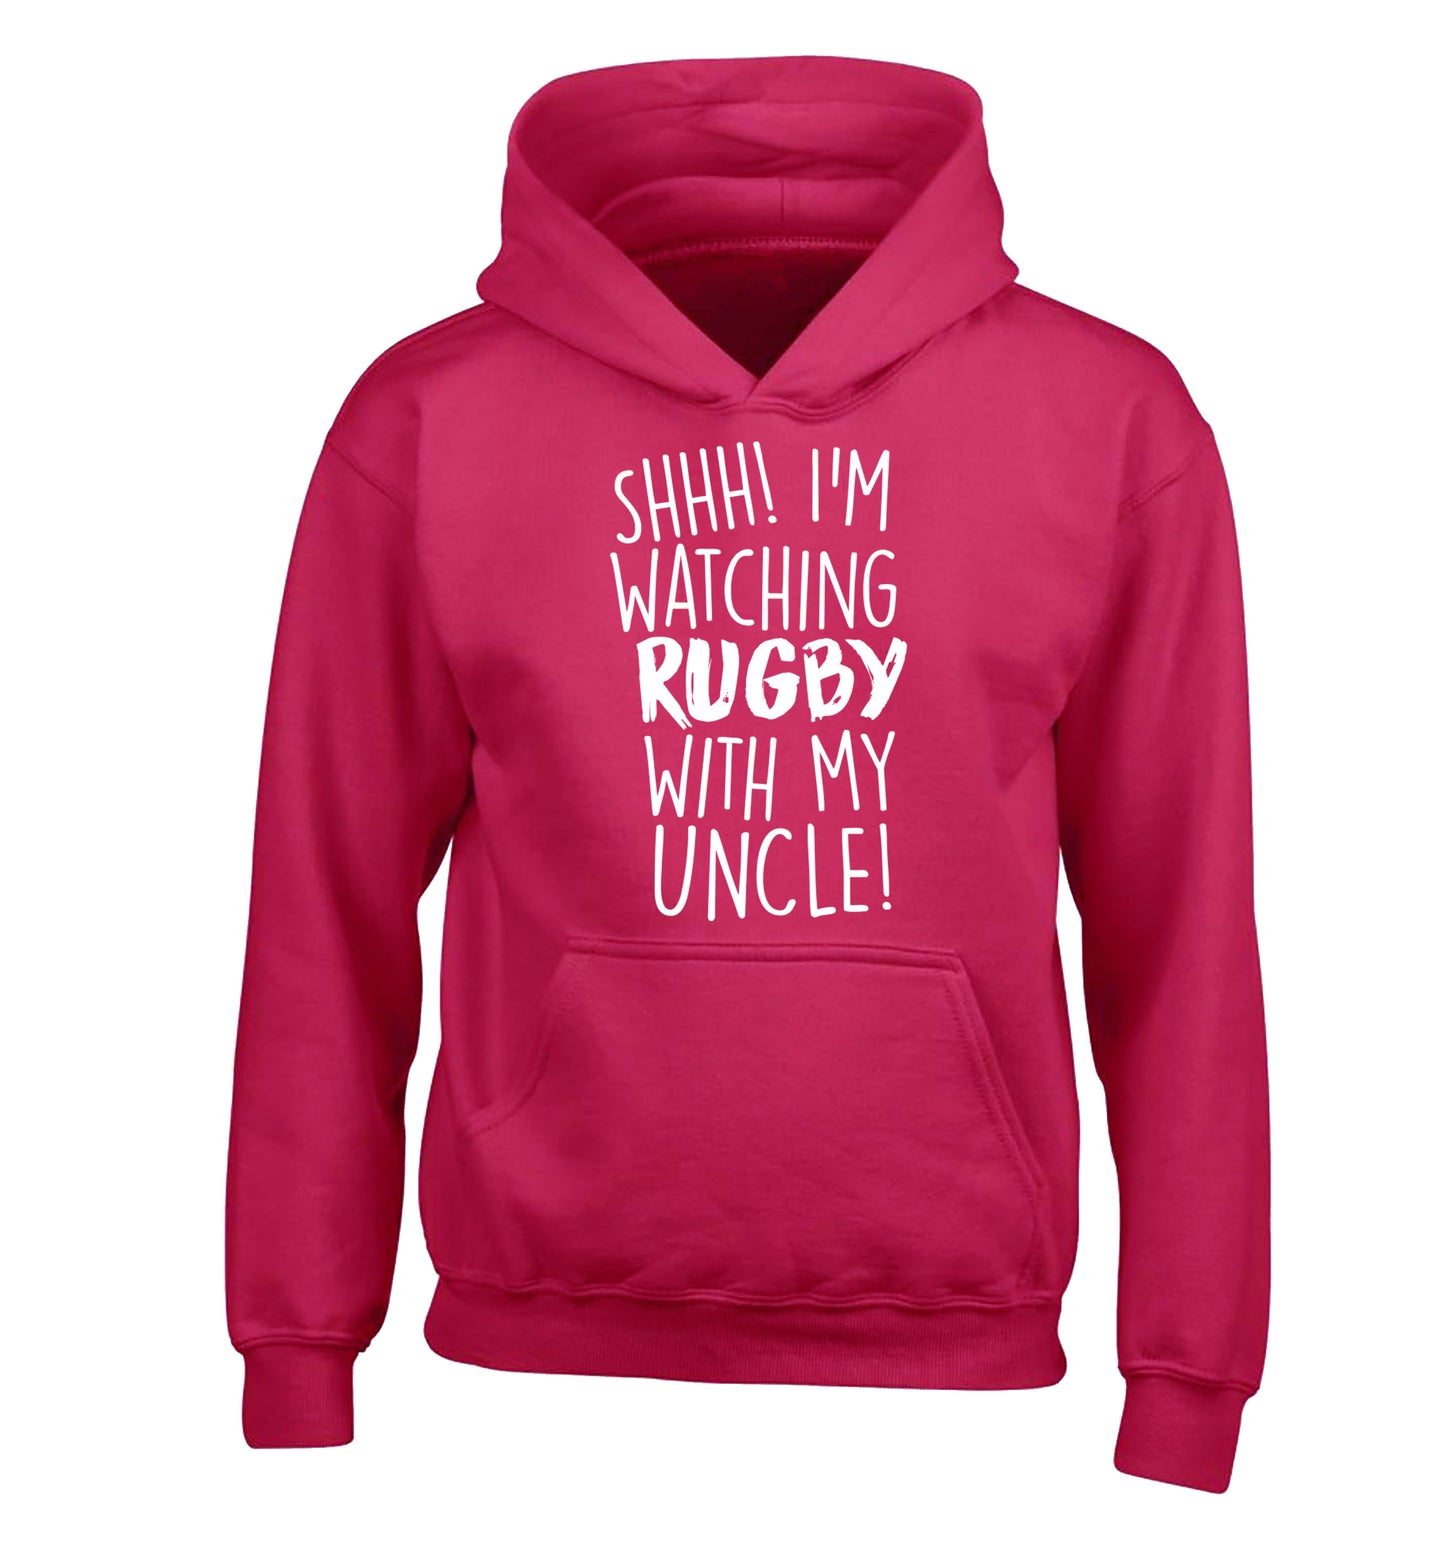 Shh.. I'm watching rugby with my uncle children's pink hoodie 12-13 Years